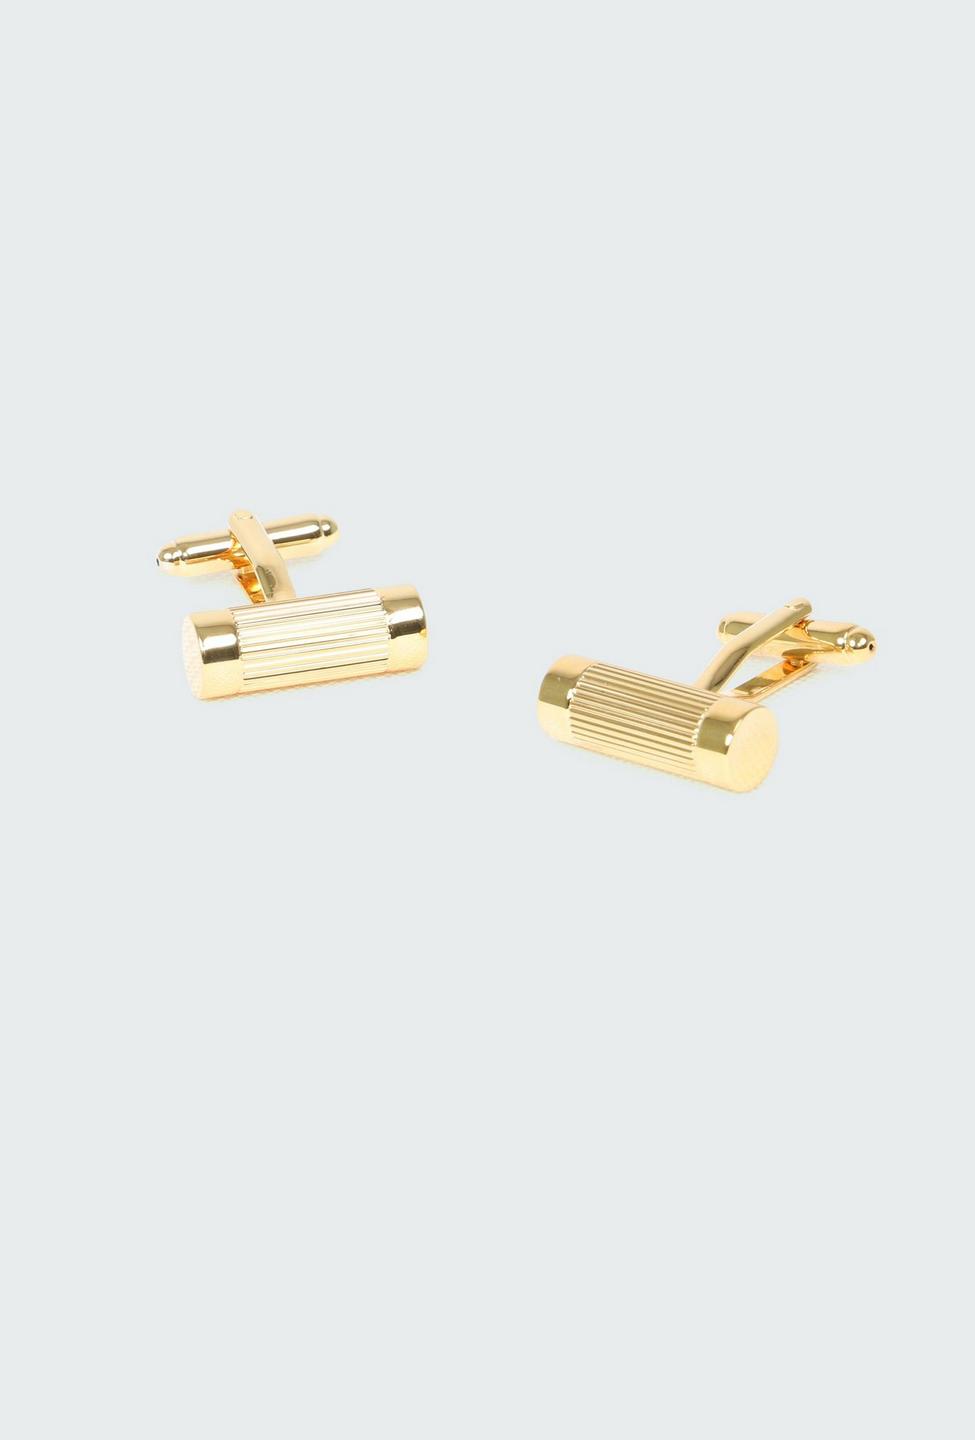 Gold cuff links - Solid Design from Premium Indochino Collection